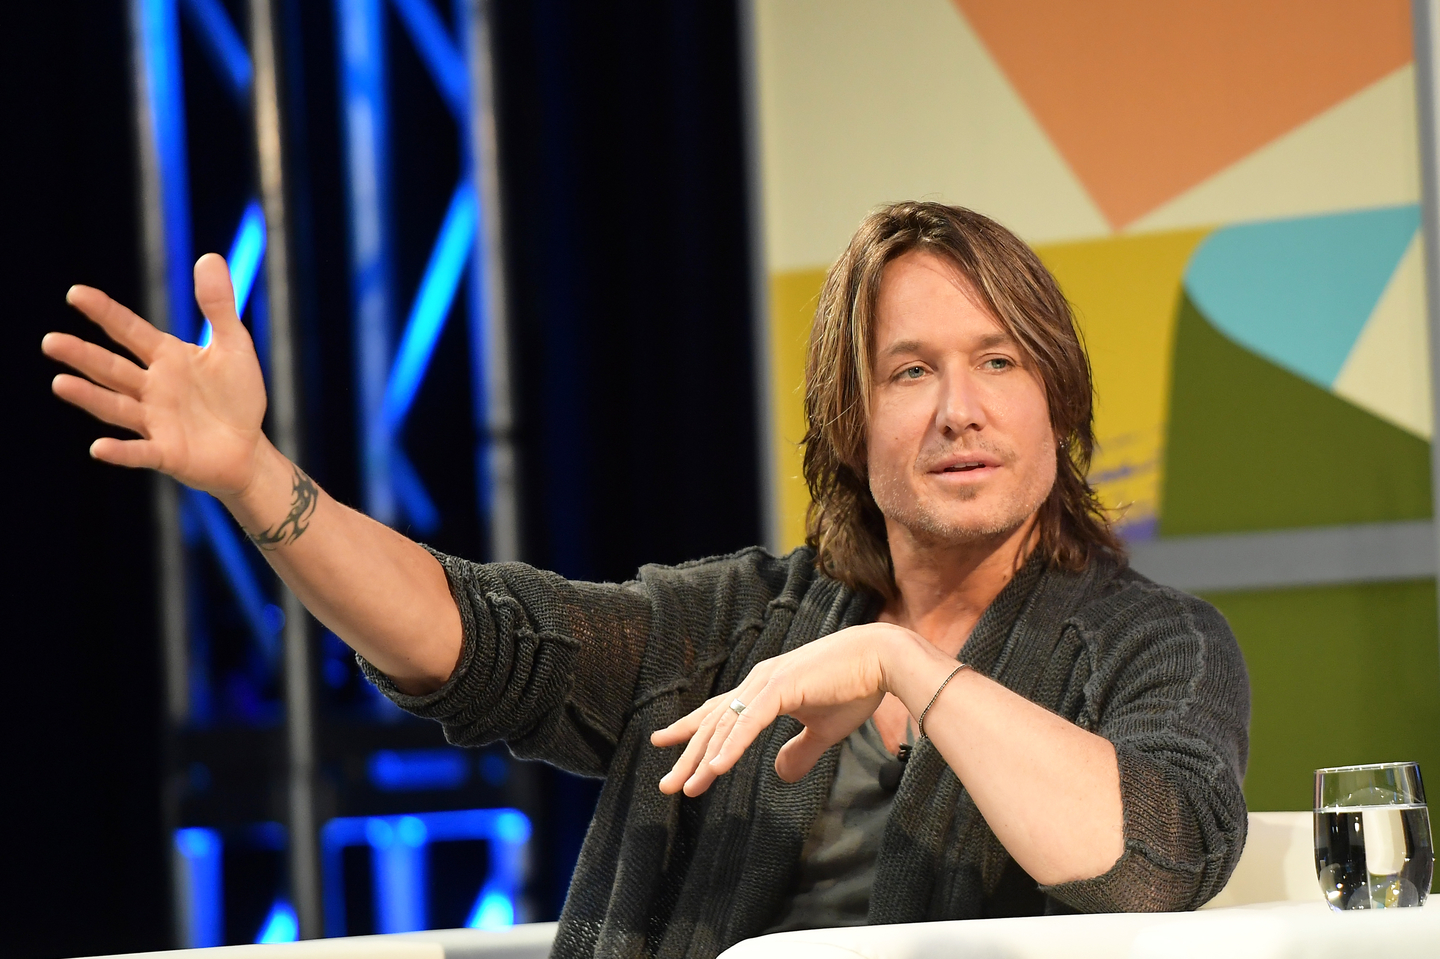 Keith Urban sat down for “A Conversation with Keith Urban.” Photo by Matt Winkelmeyer/Getty Images for SXSW